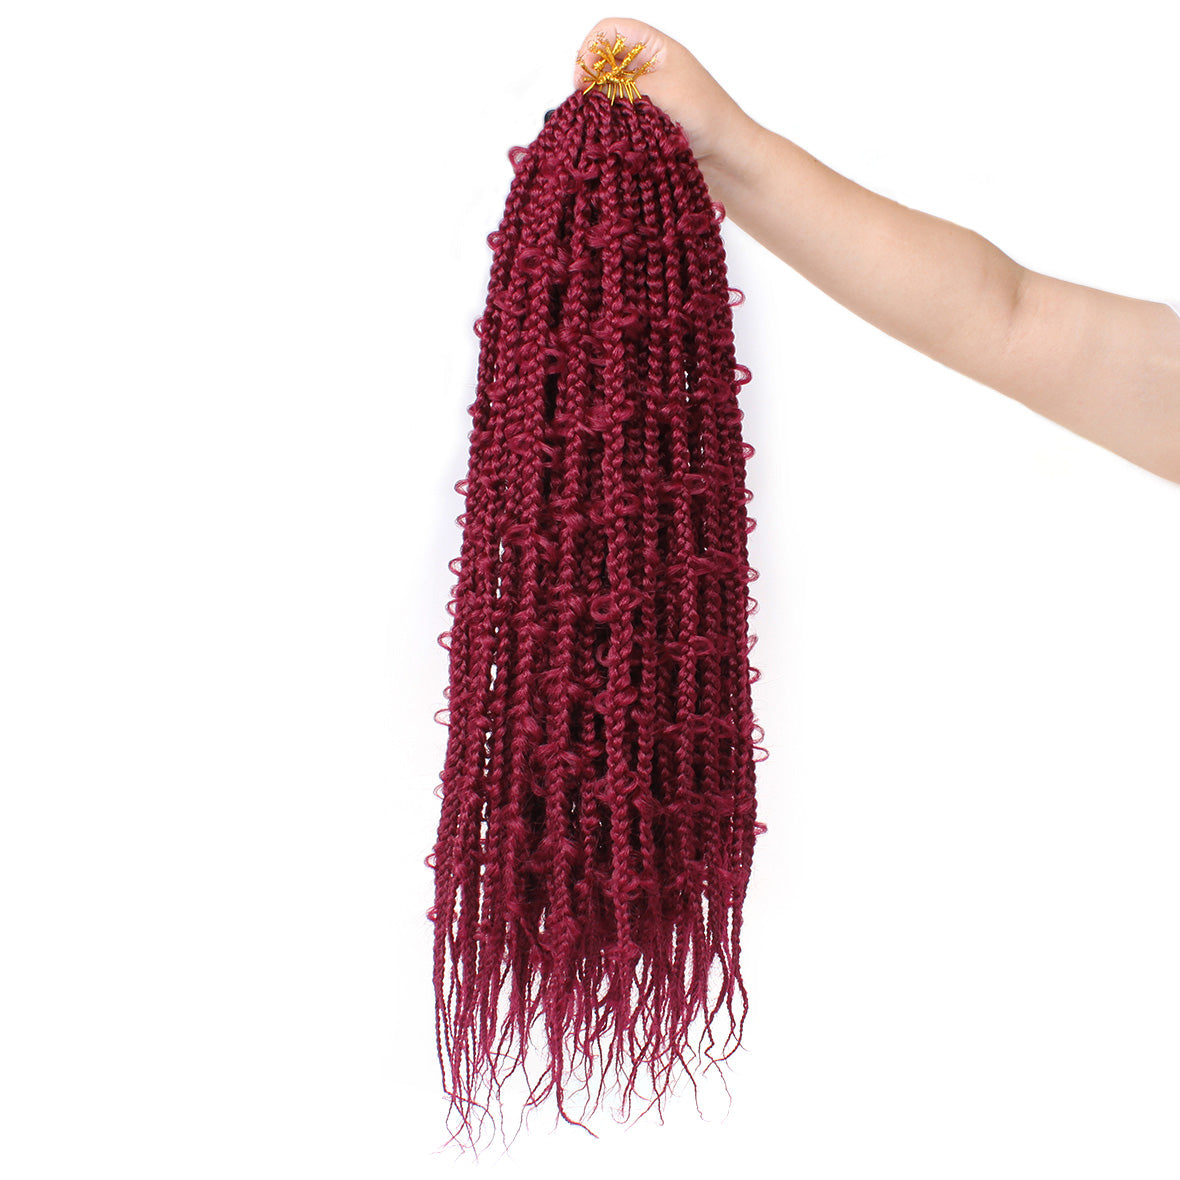 Xtrend Knotless Jungle Box Braids 12 Stands 20 Inch Goddess Box Braids Hair Pre-looped Synthetic Hair Butterfly Crotchet Braids Hair Extension